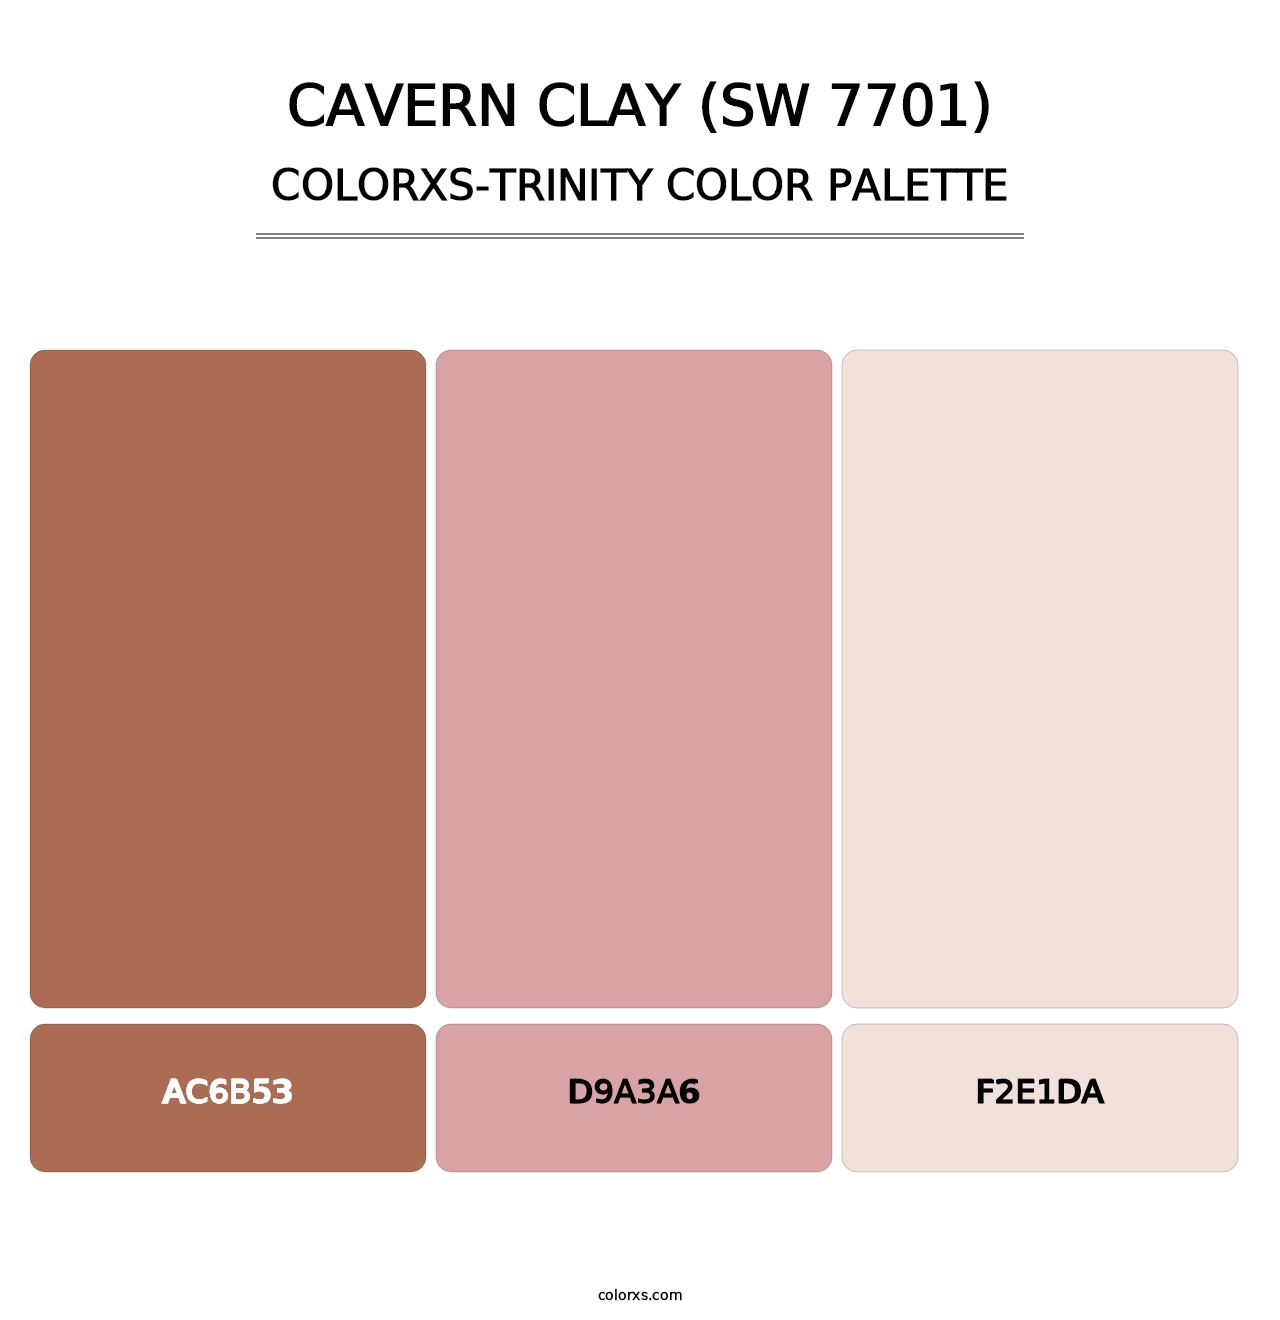 Cavern Clay (SW 7701) - Colorxs Trinity Palette